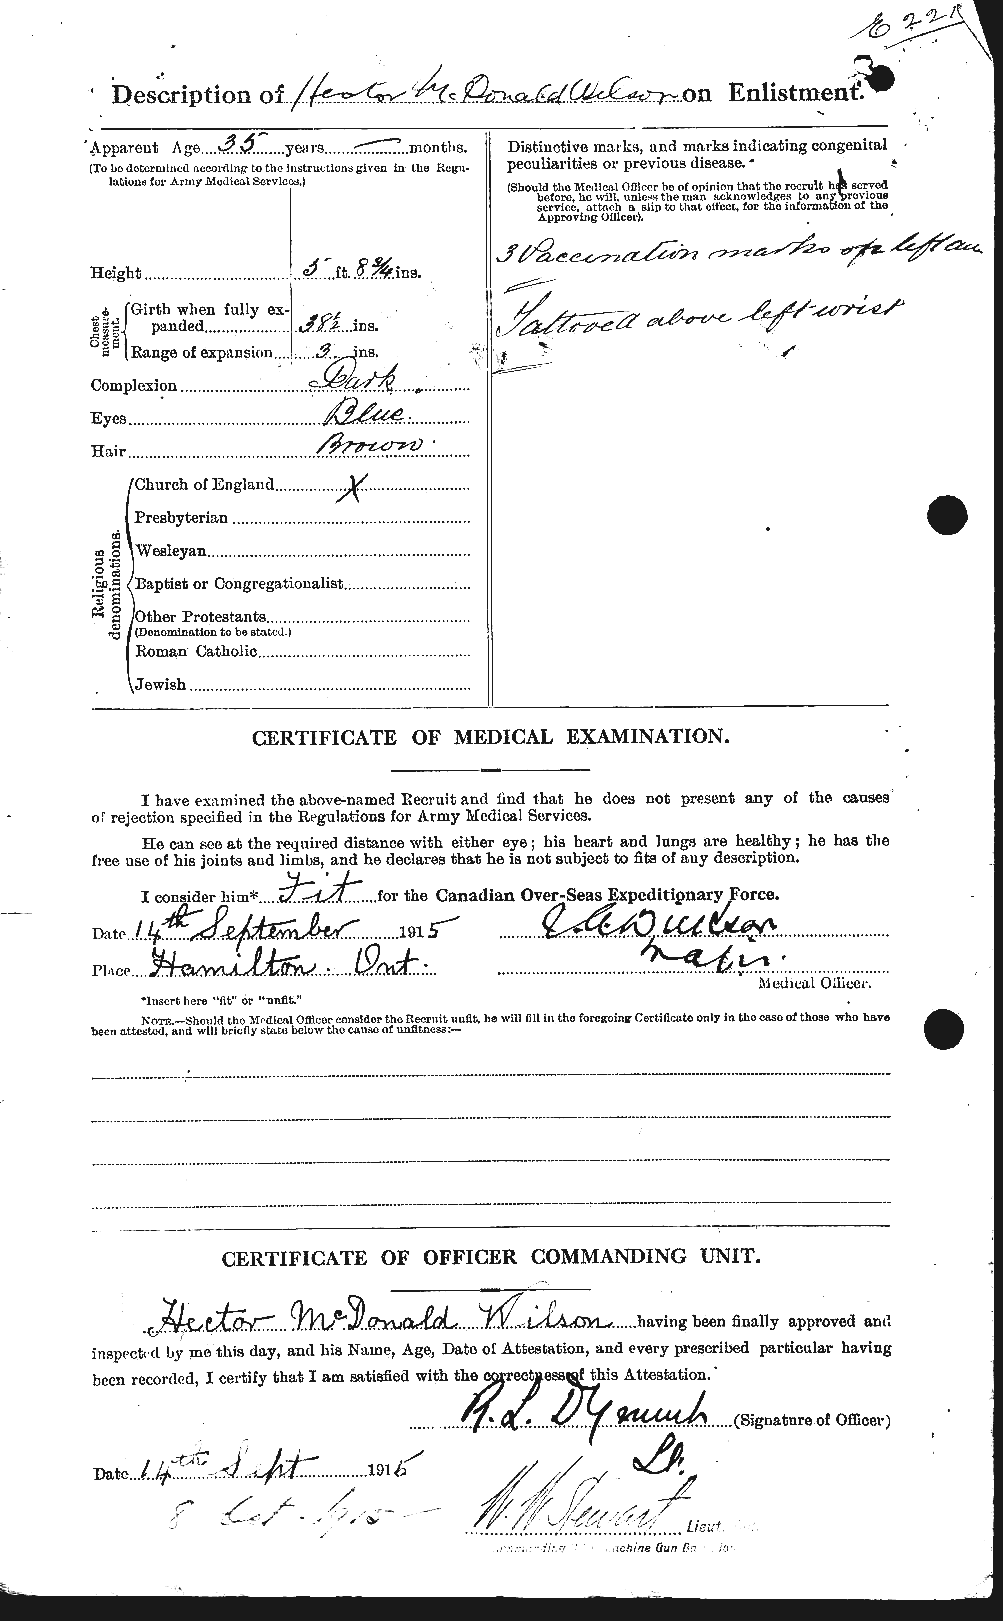 Personnel Records of the First World War - CEF 679490b